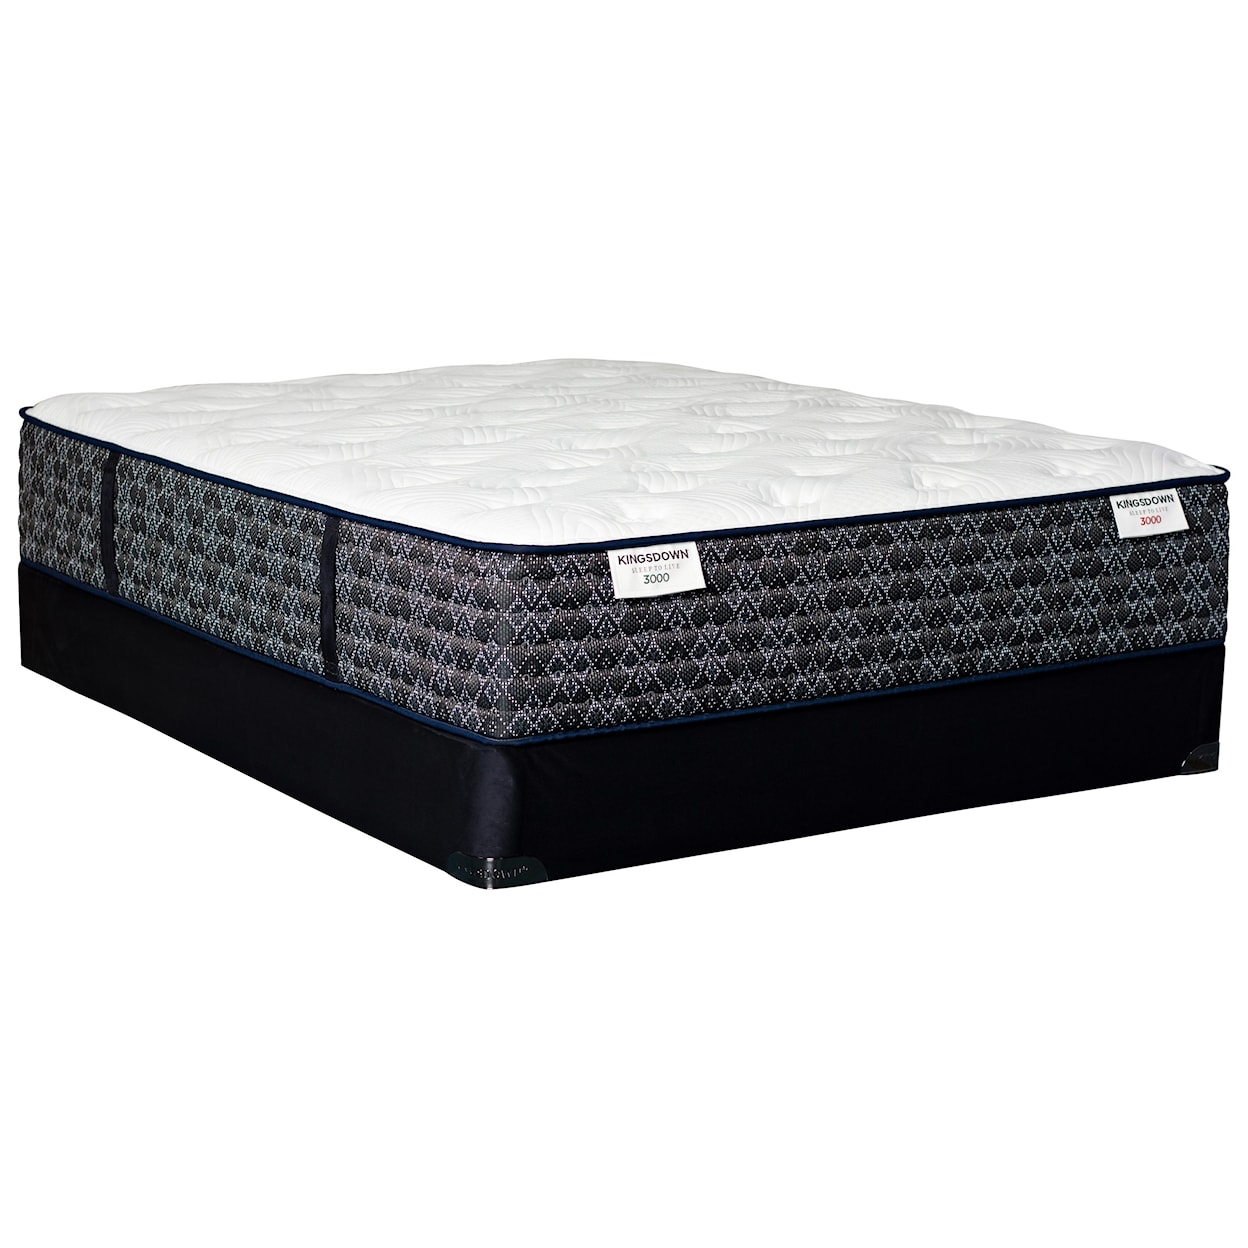 Kingsdown Sleep to Live 3000 Gold Blue Twin Pocketed Coil Mattress LoPro Set